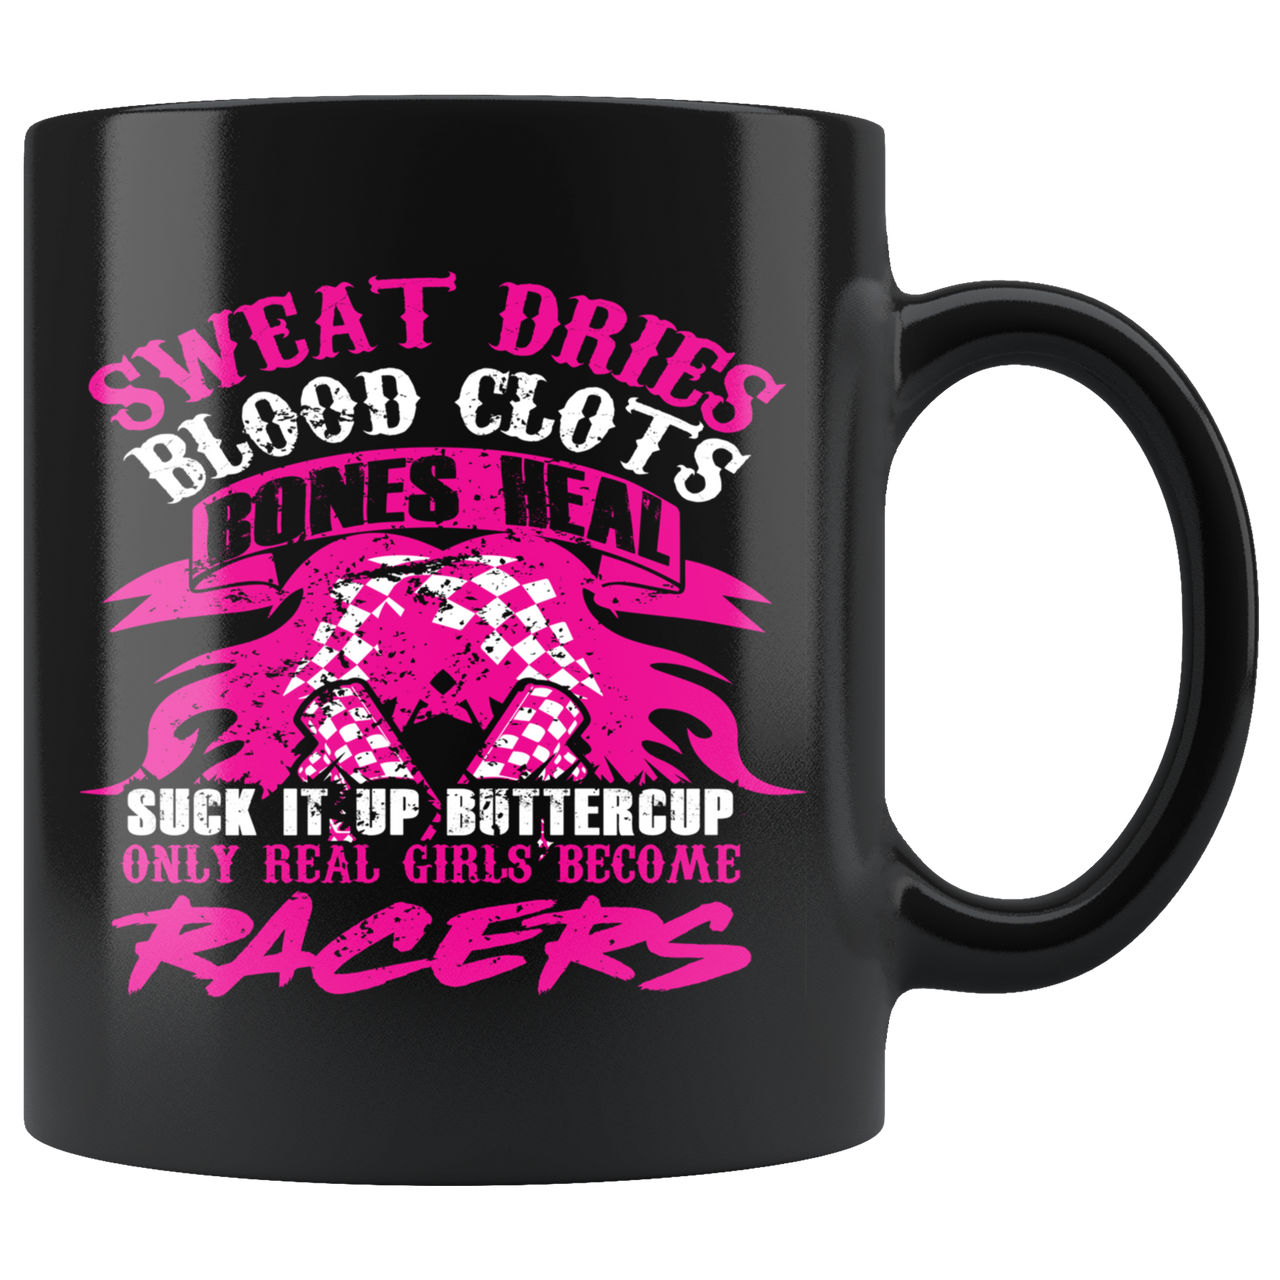 Sweat Dries Blood Clots Bones Heal Only Real Girls Become Racers Mug!